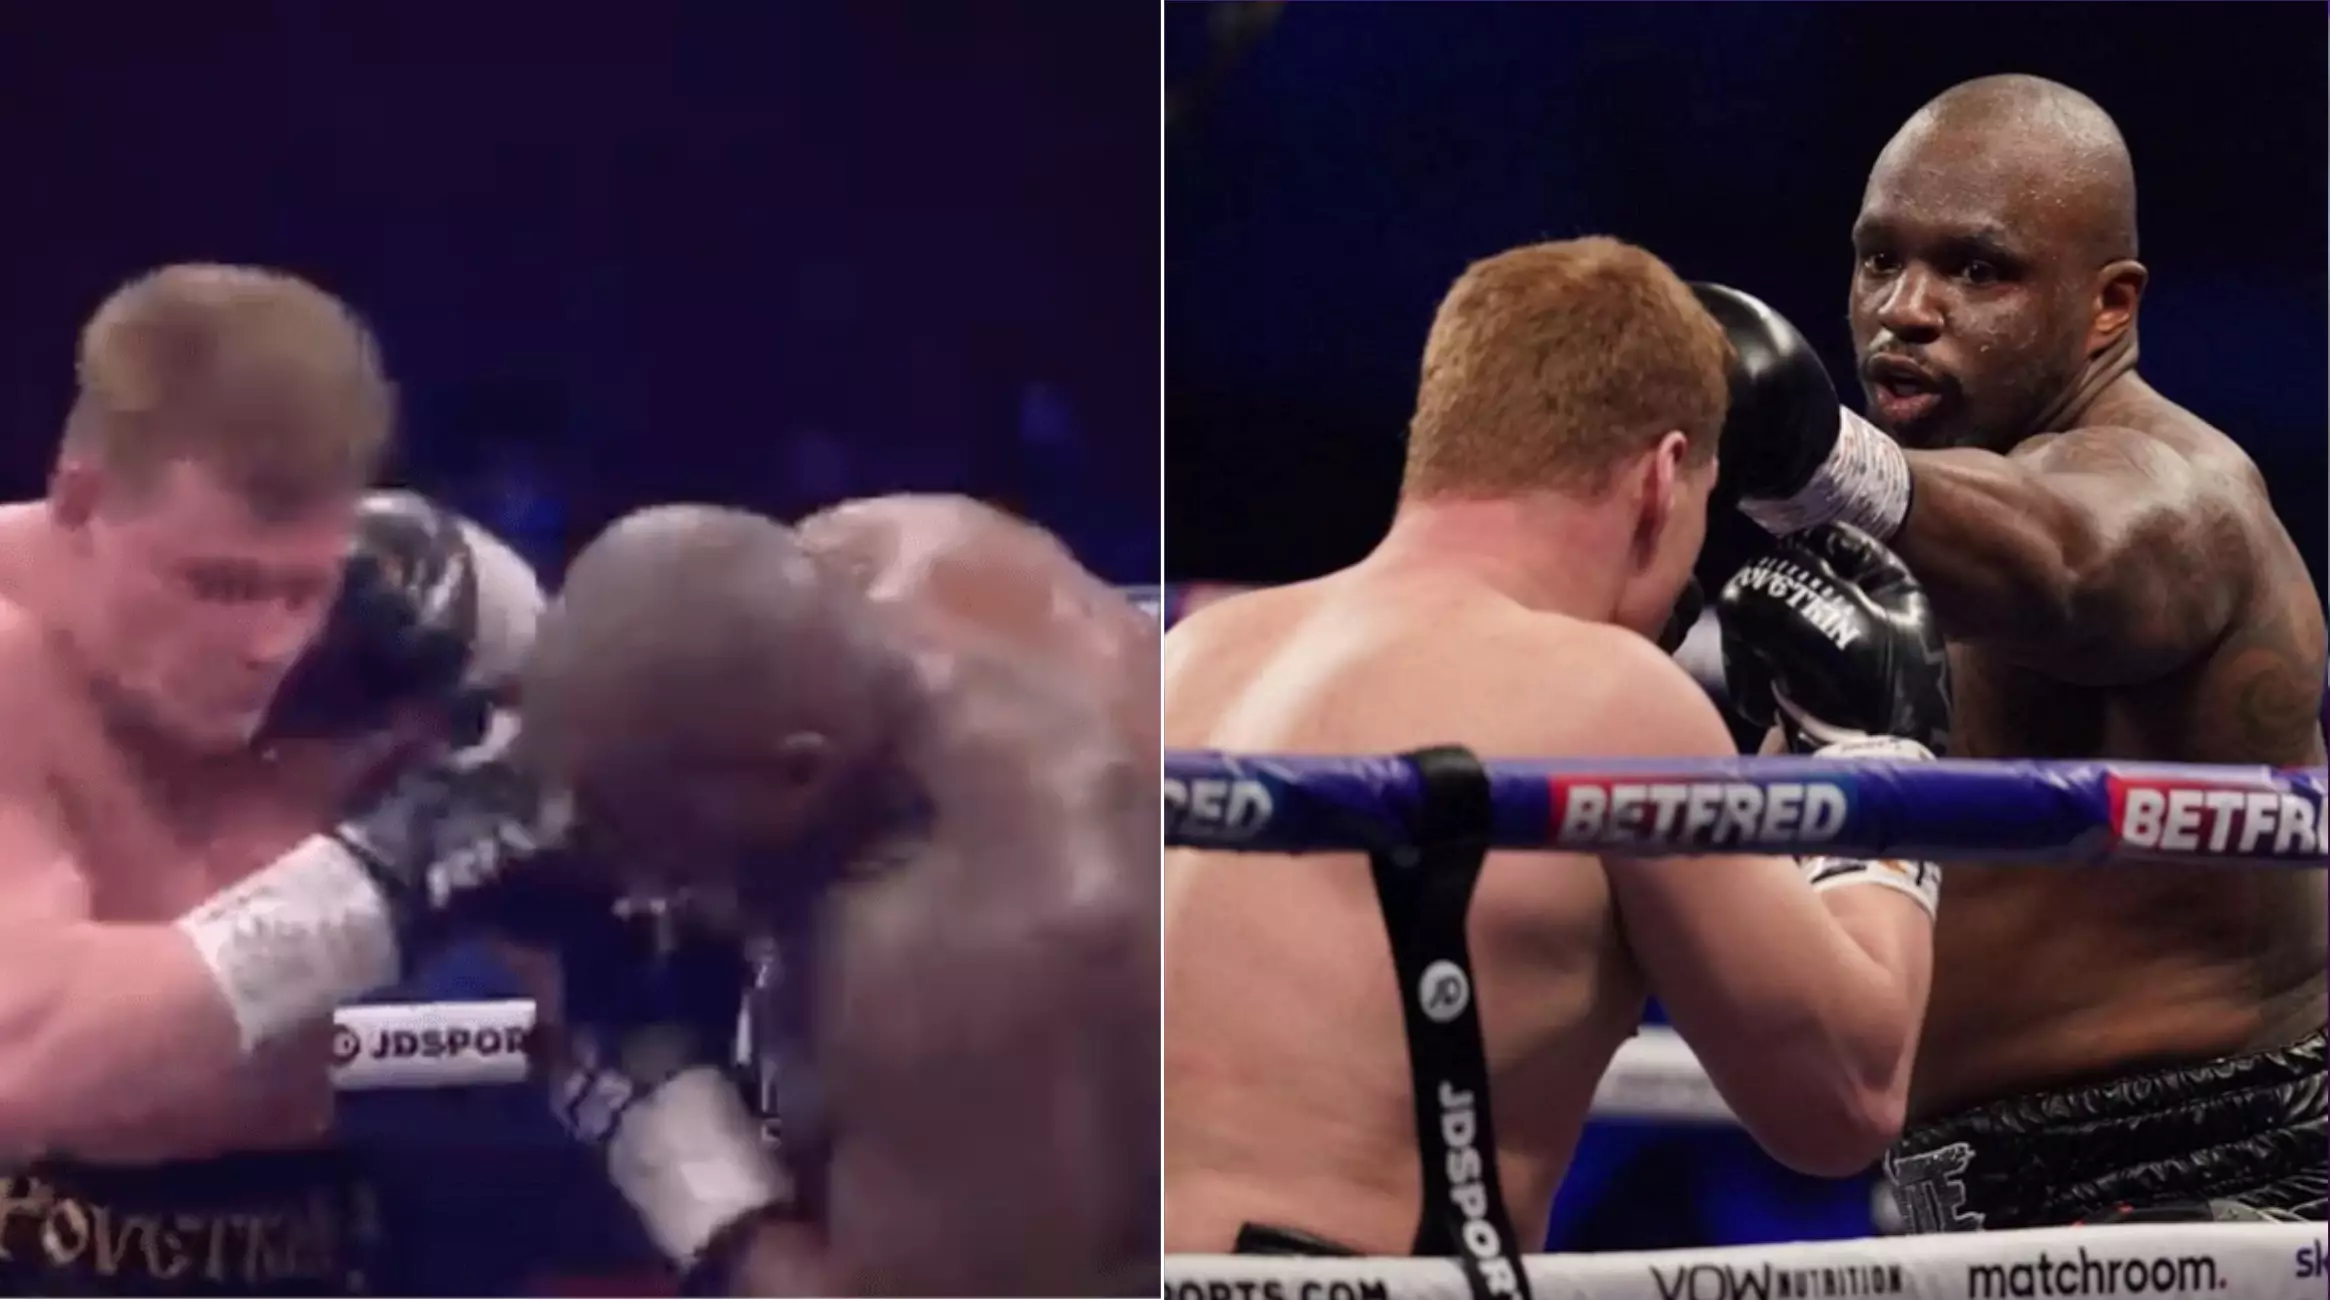 Dillian Whyte Brutally Knocks Out Alexander Povetkin After Four-Round Demolition